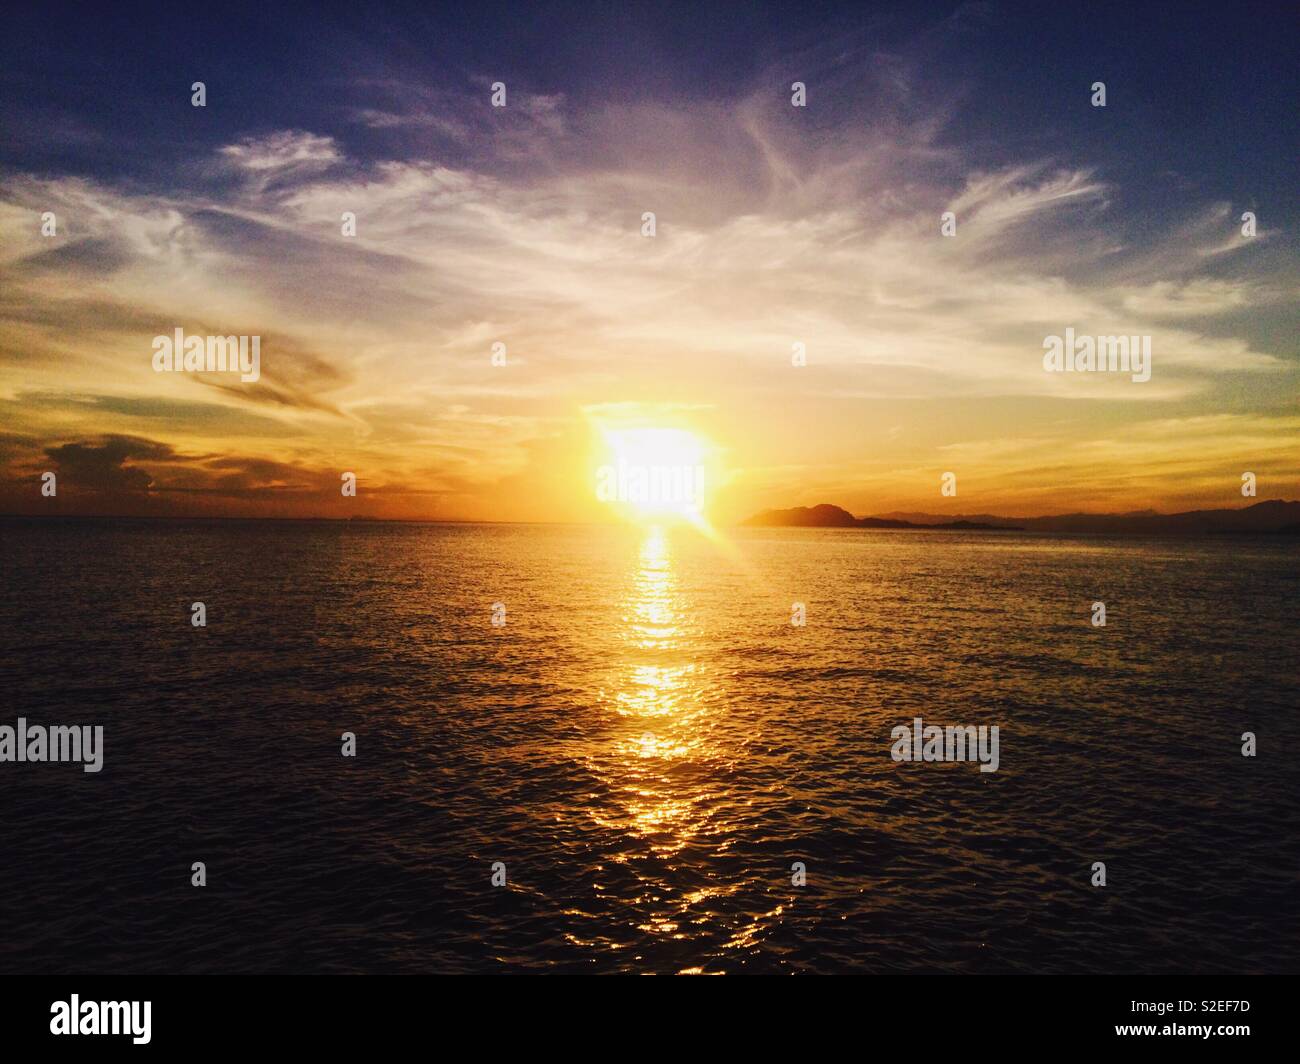 Sunset is addictive. Once you got its best, you’ll crave for it, again and again. This one is the perfect sunset from Labuan Bajo, Indonesia circa 2017. Stock Photo